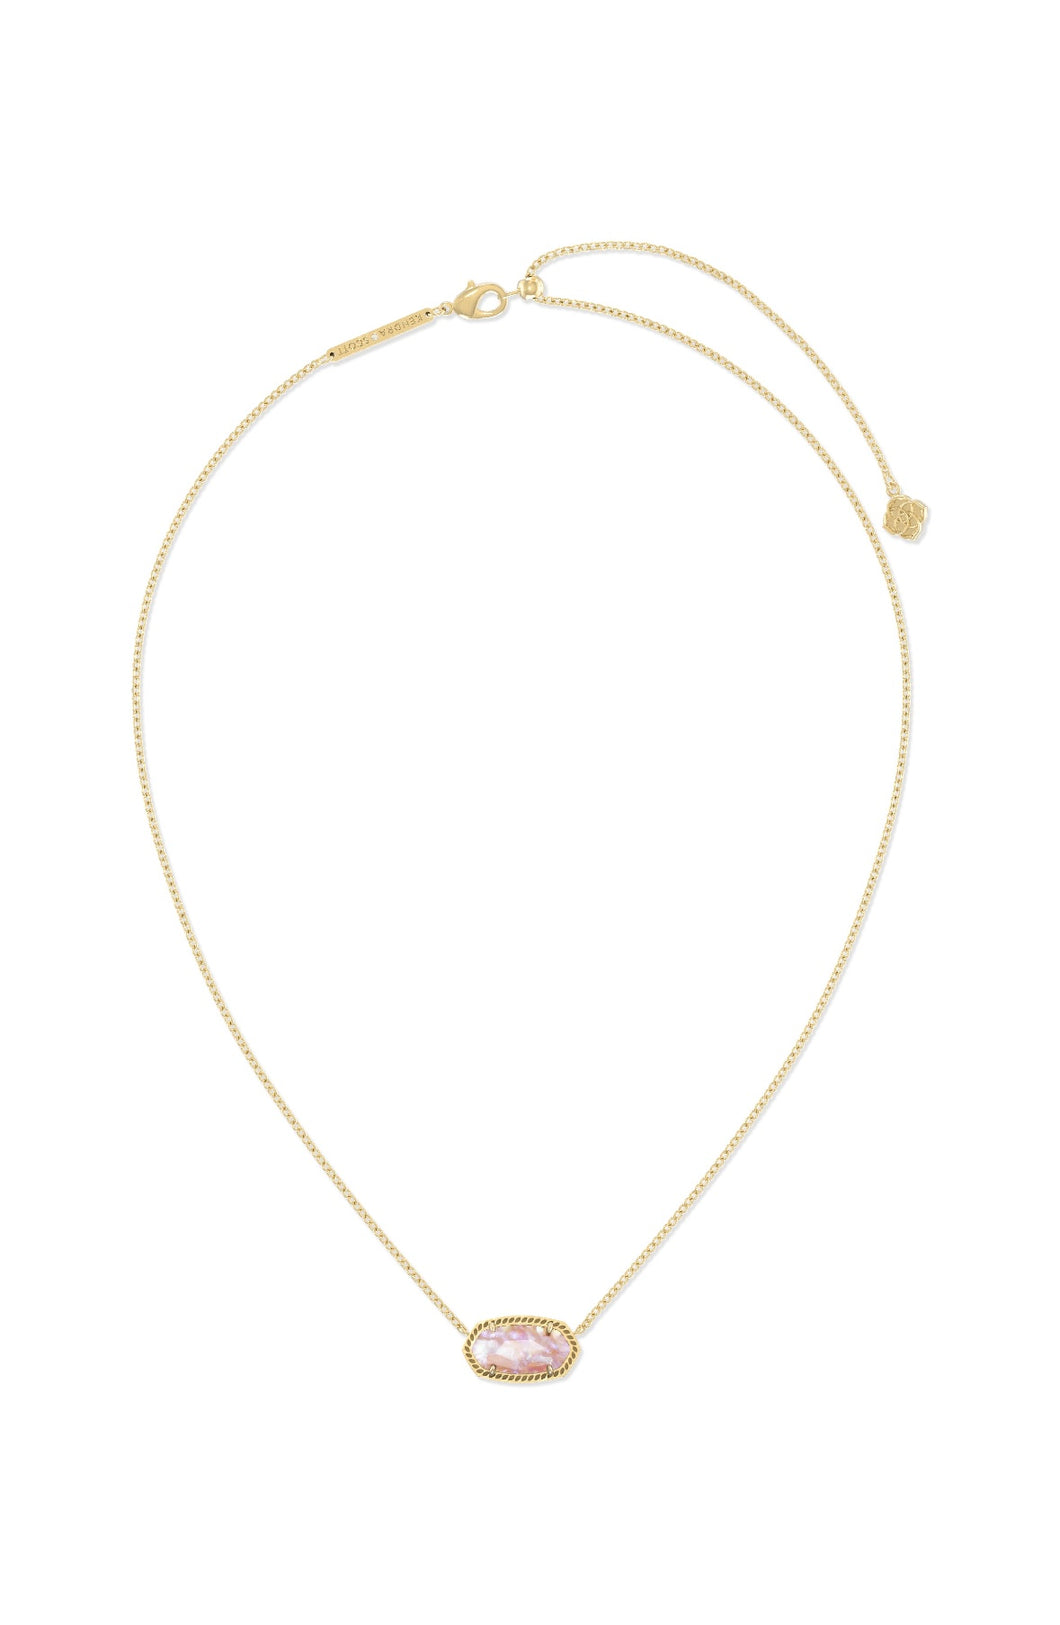 Kendra Scott: Elisa Necklace in Gold Pink Iridescent Abalone